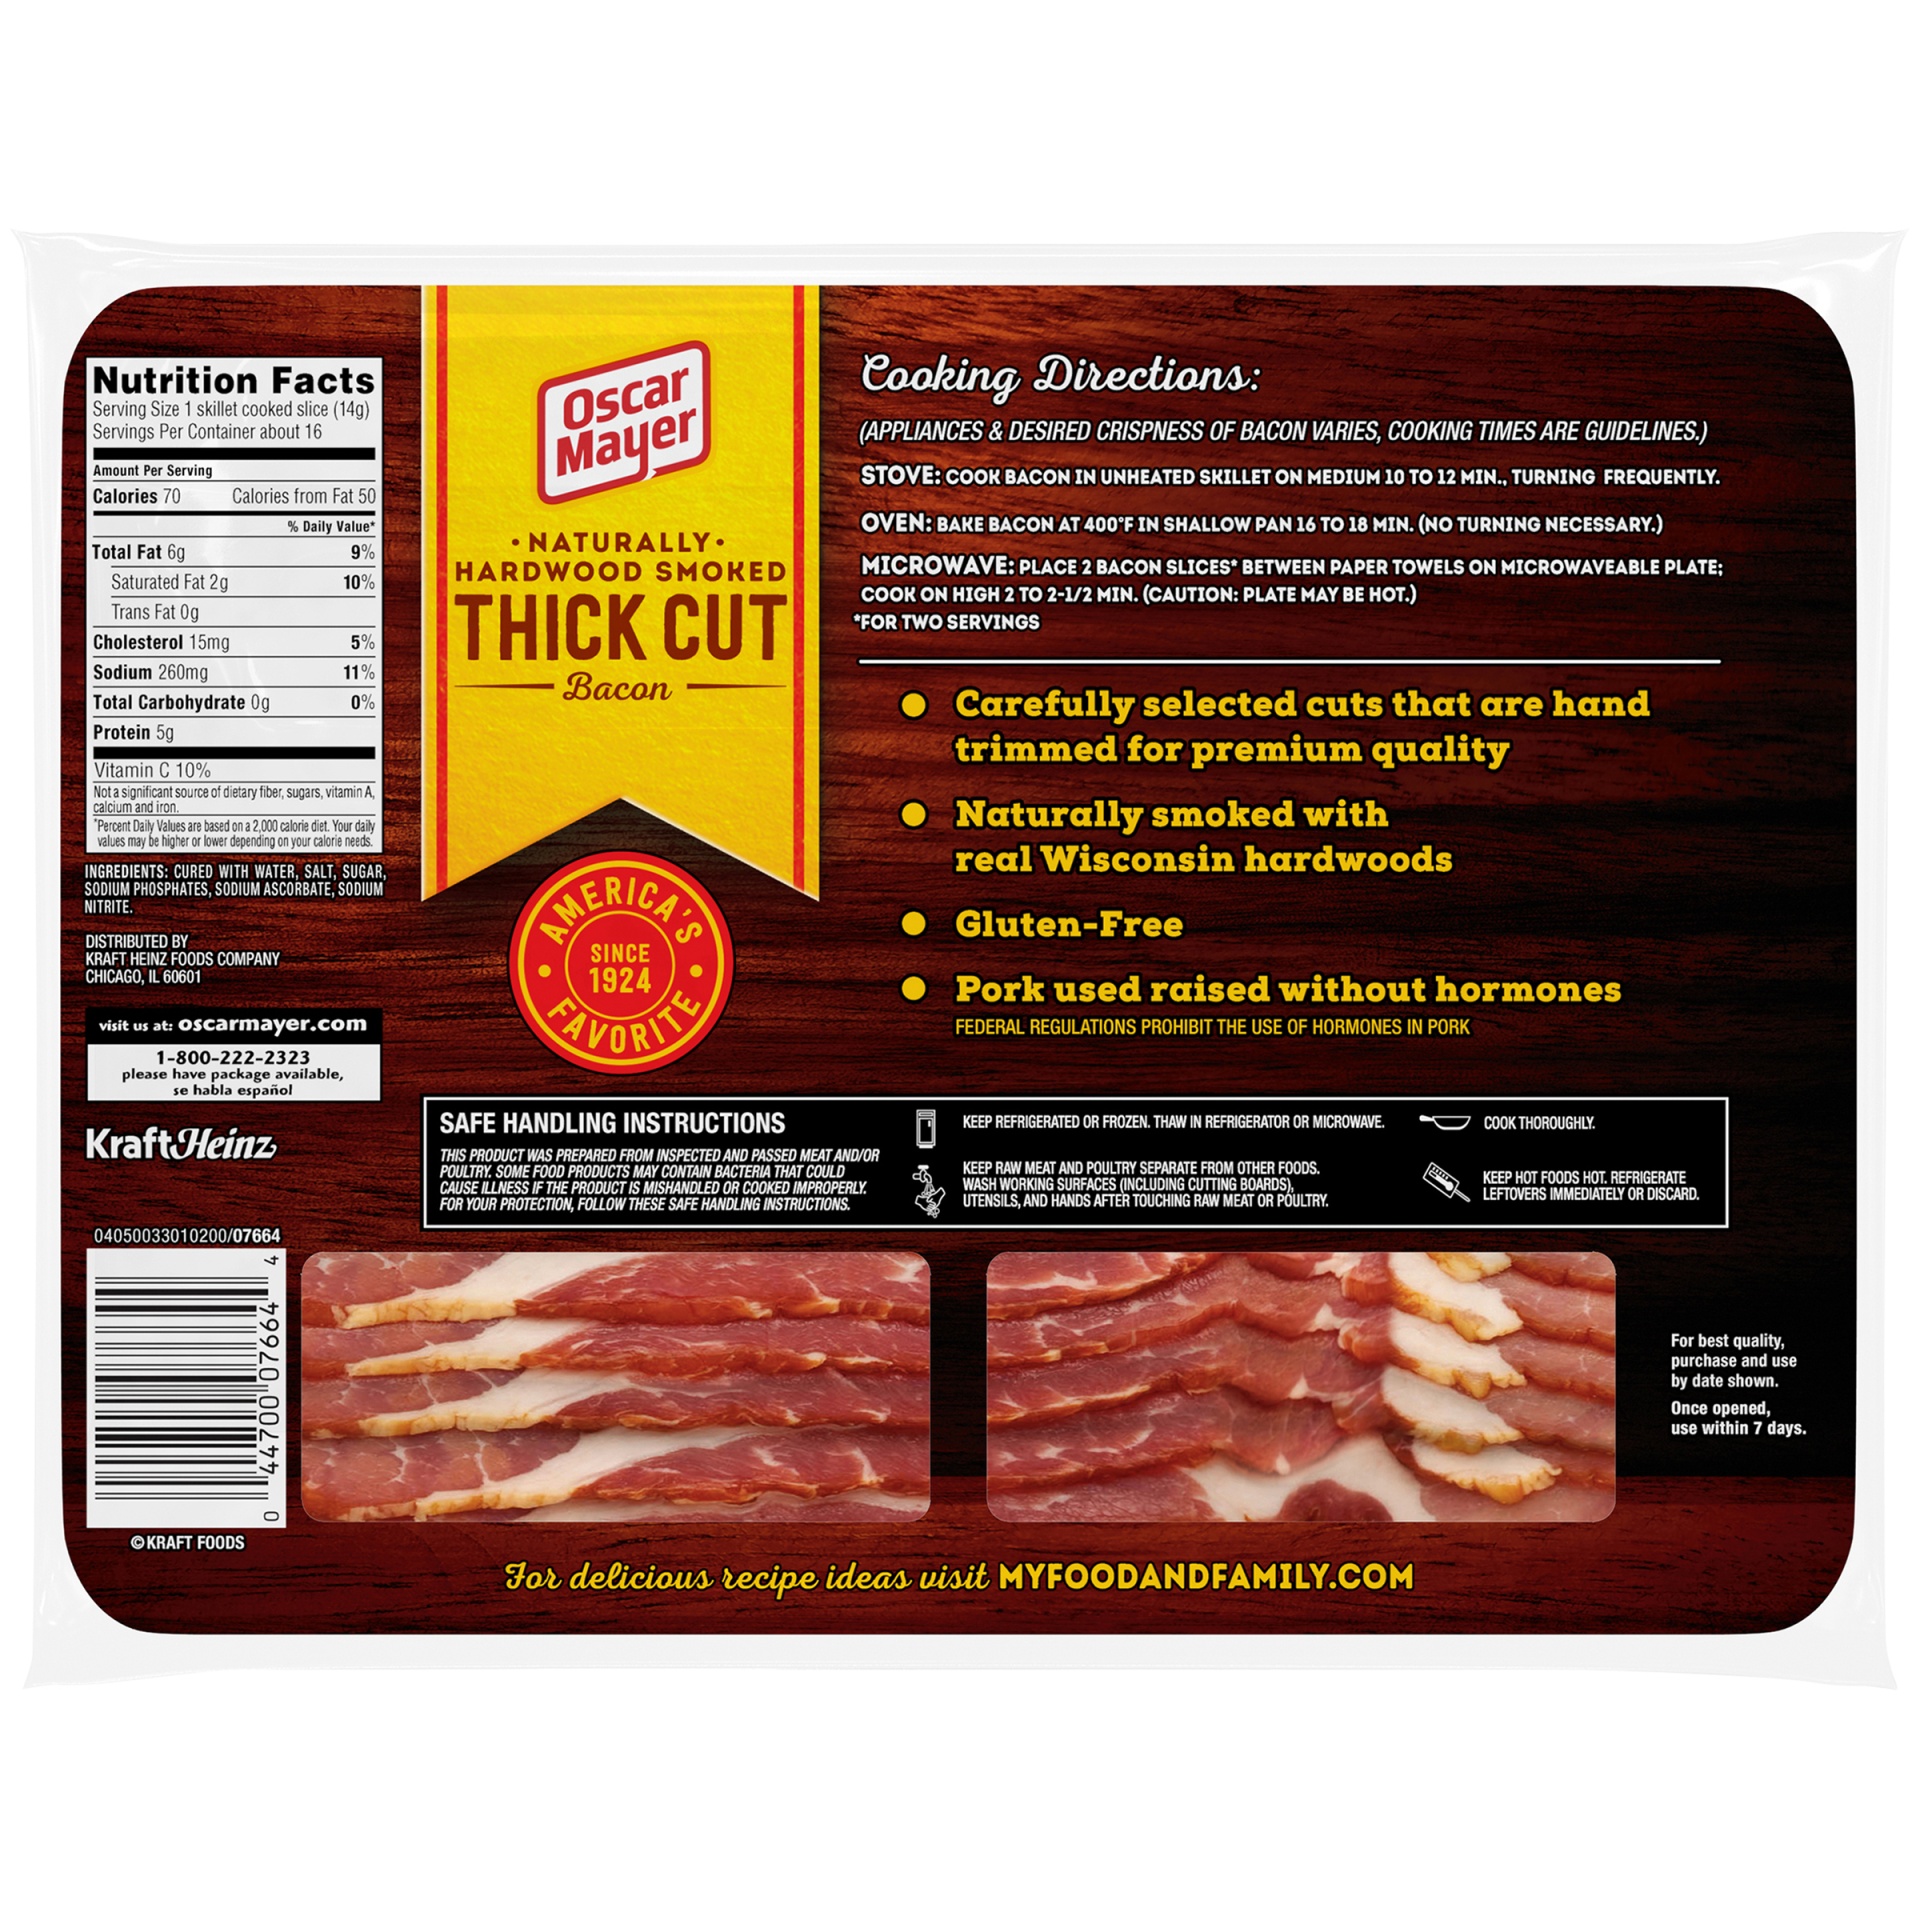 slide 5 of 7, Oscar Mayer Naturally Hardwood Smoked Thick Cut Bacon Mega Pack Pack, 15-17 Slices, 22 oz